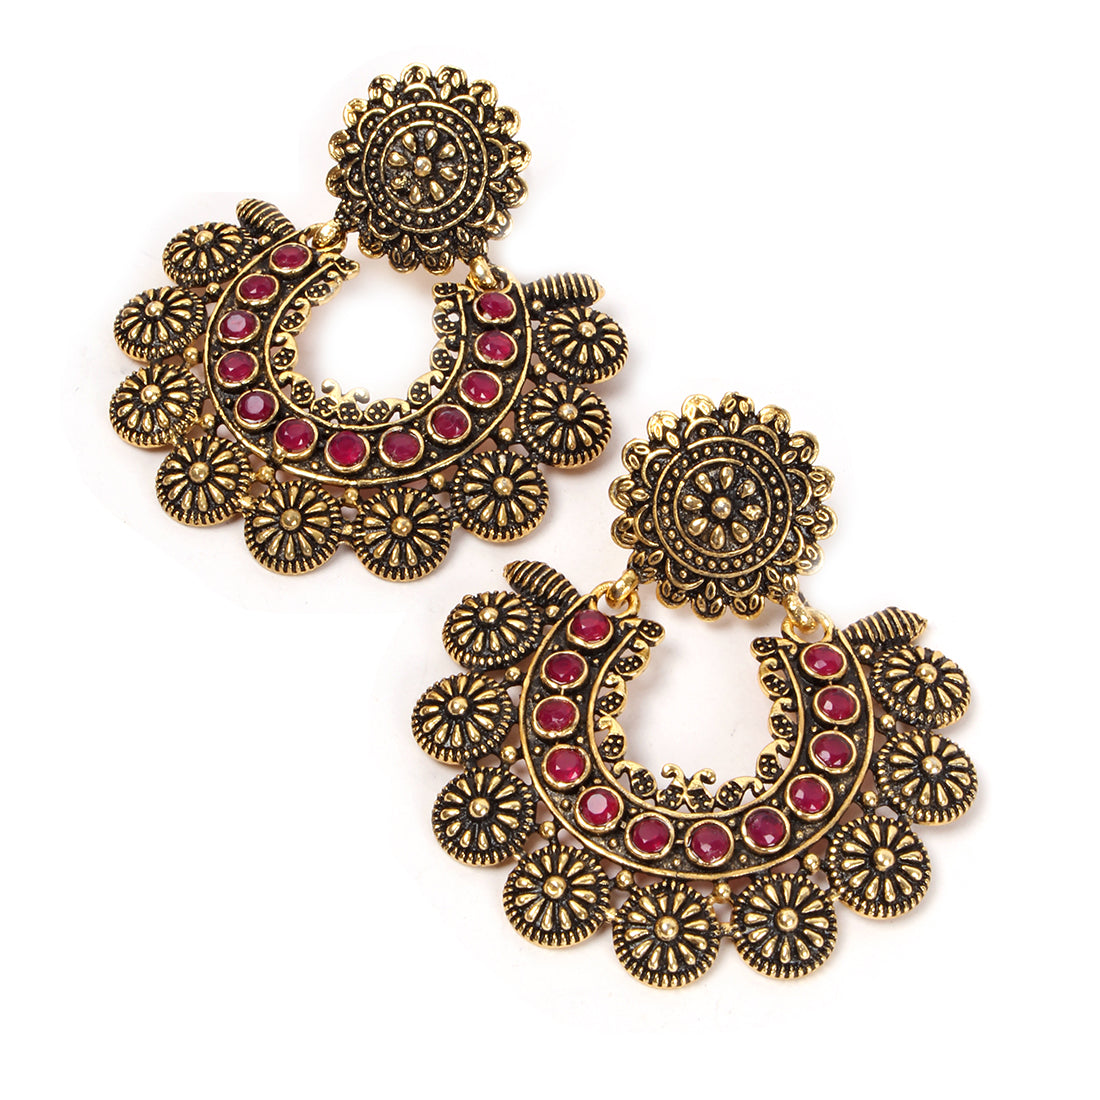 OVERSIZED HANDCRAFTED ETHNIC GOLD-TONED RED RHINESTONE STUDDED DROP EARRINGS